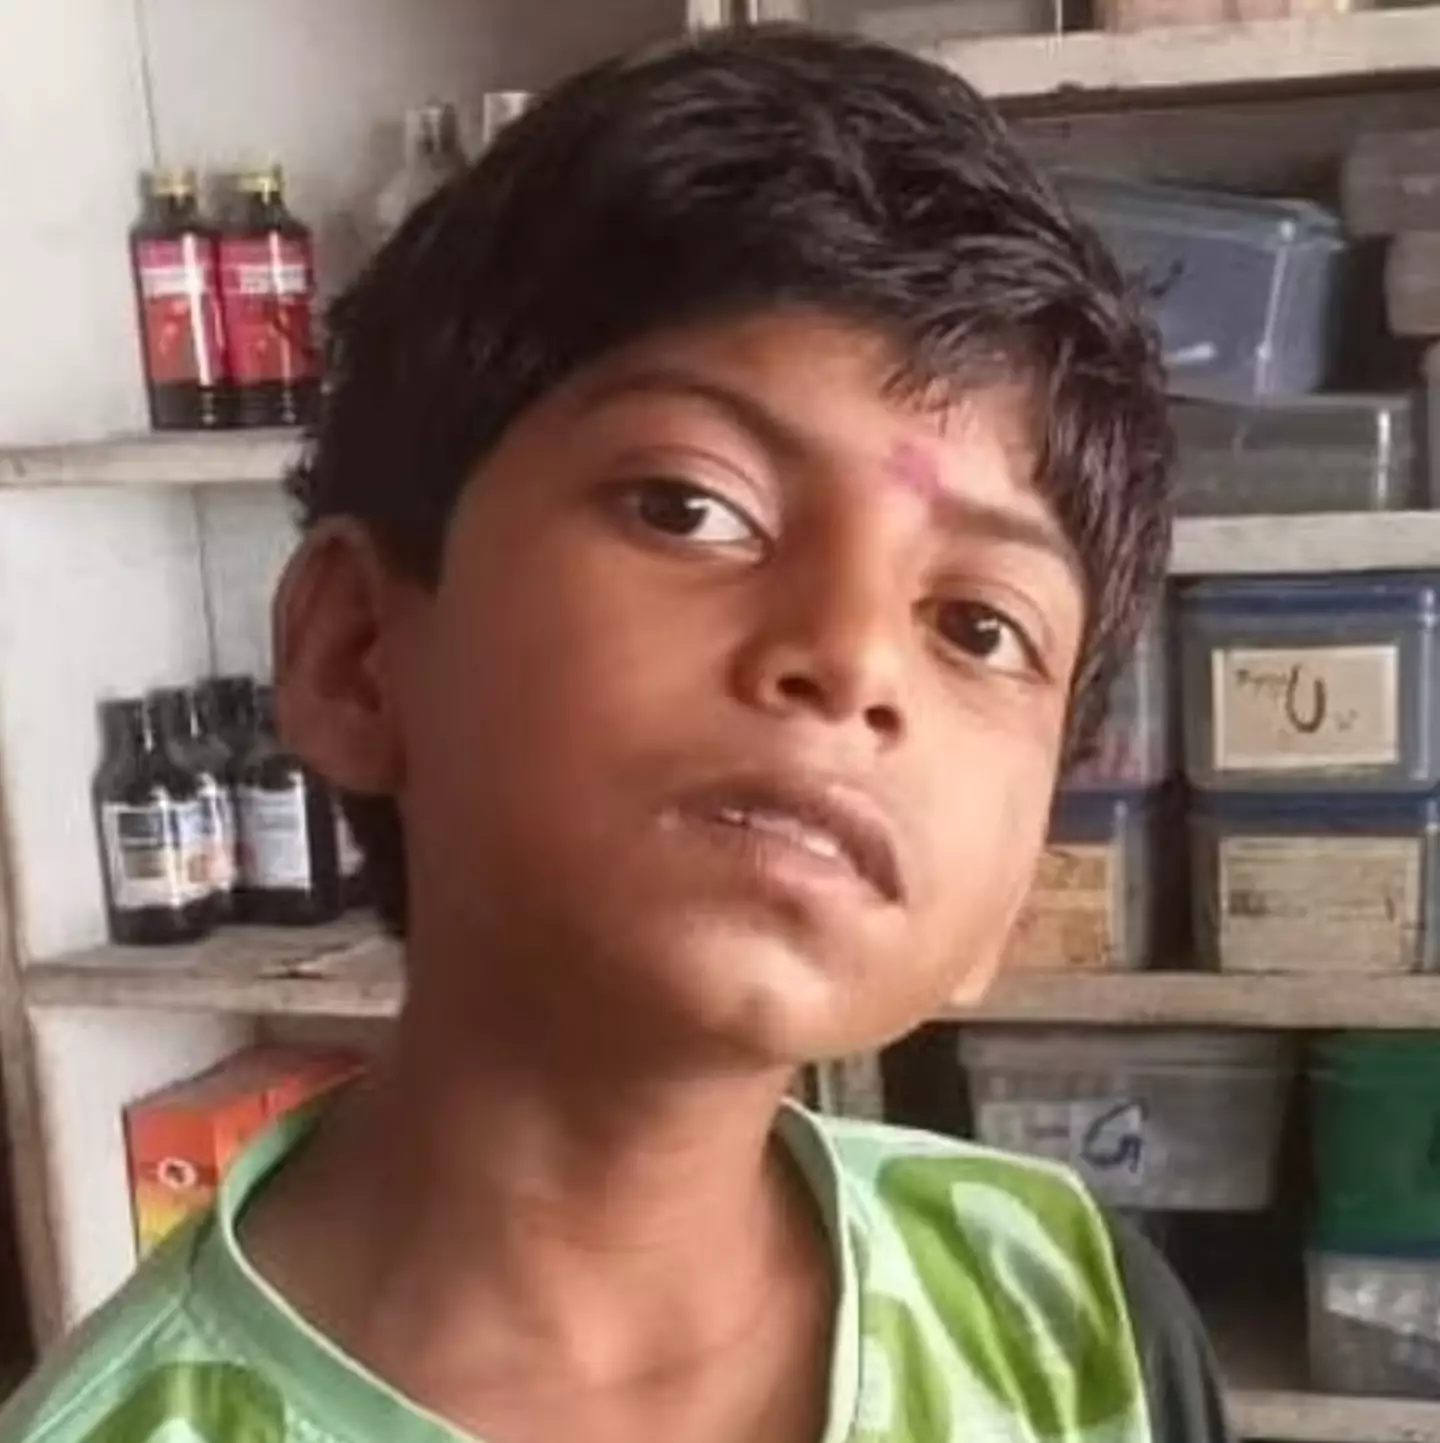 Desperate efforts are being made to save a 10-year-old boy who has been trapped in a well in India for four days.